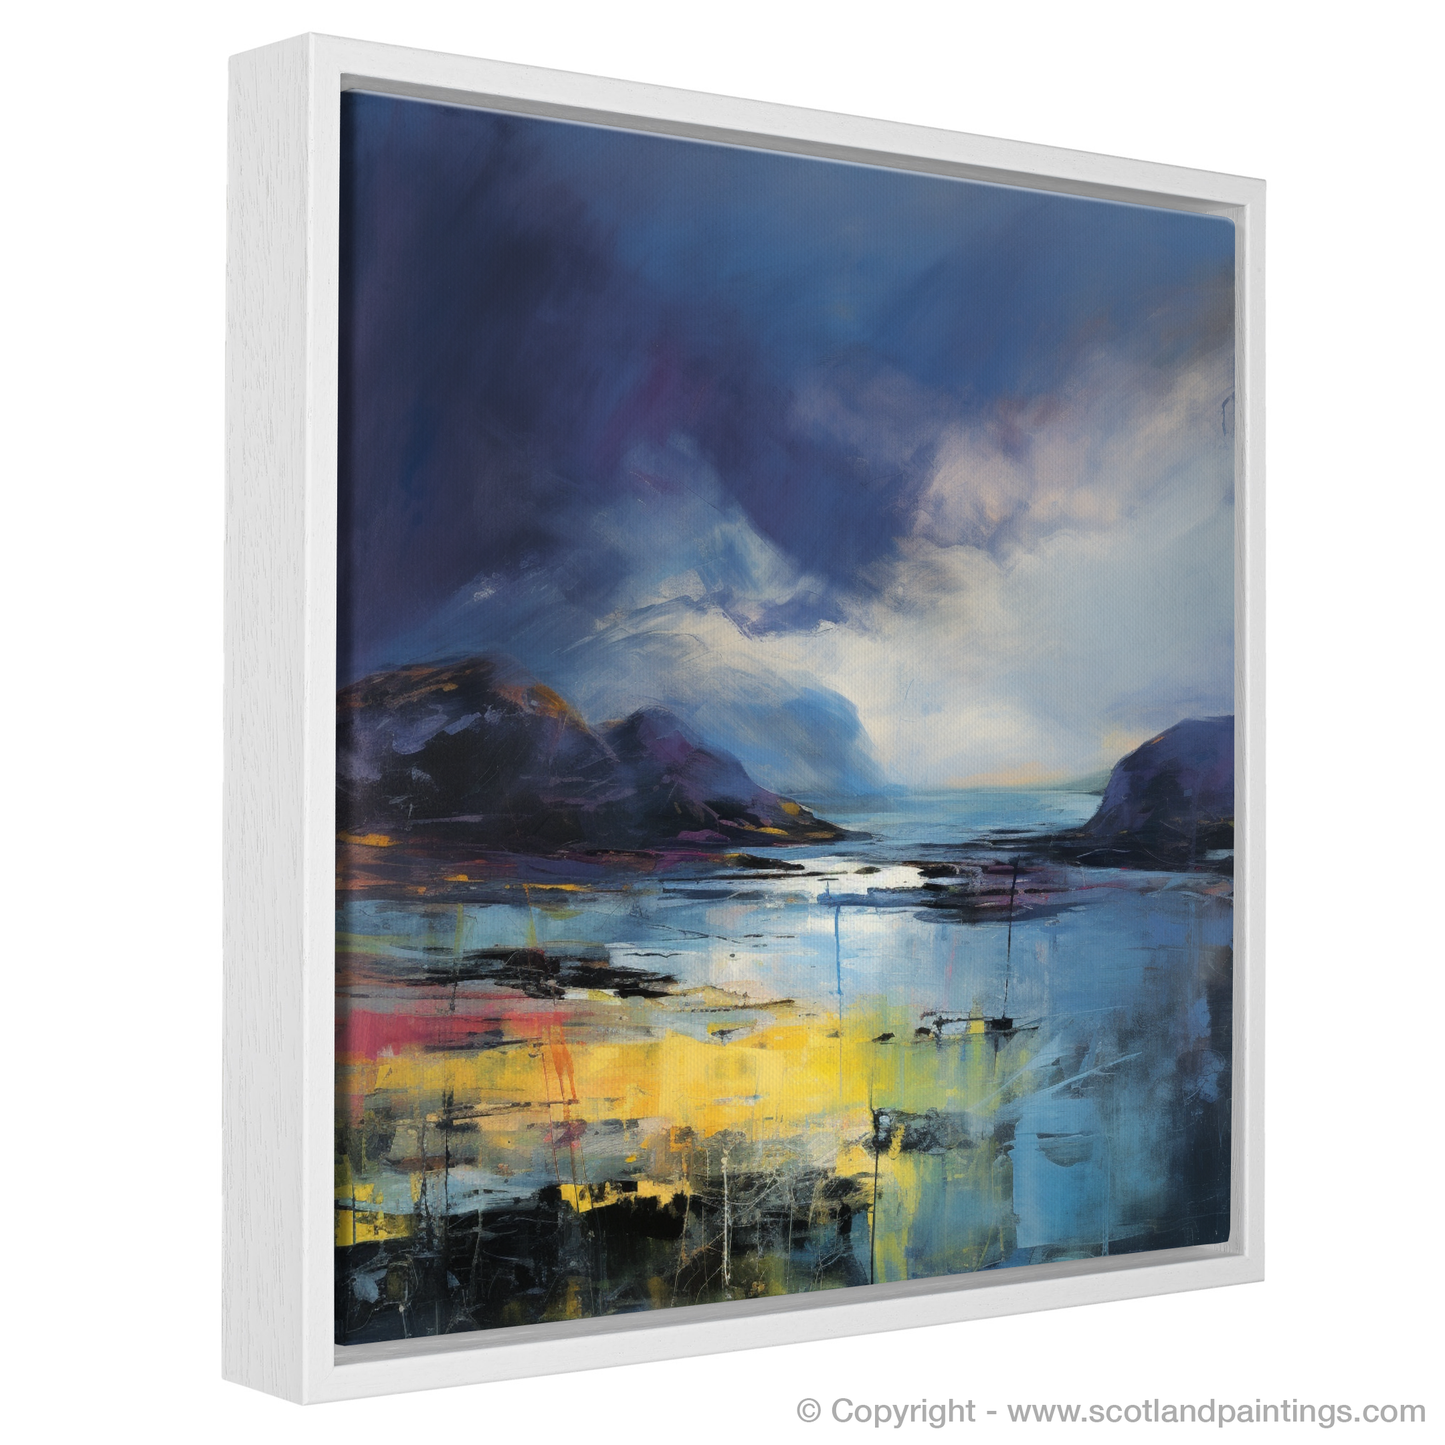 Painting and Art Print of Easdale Sound with a stormy sky entitled "Storm's Dance over Easdale Sound".